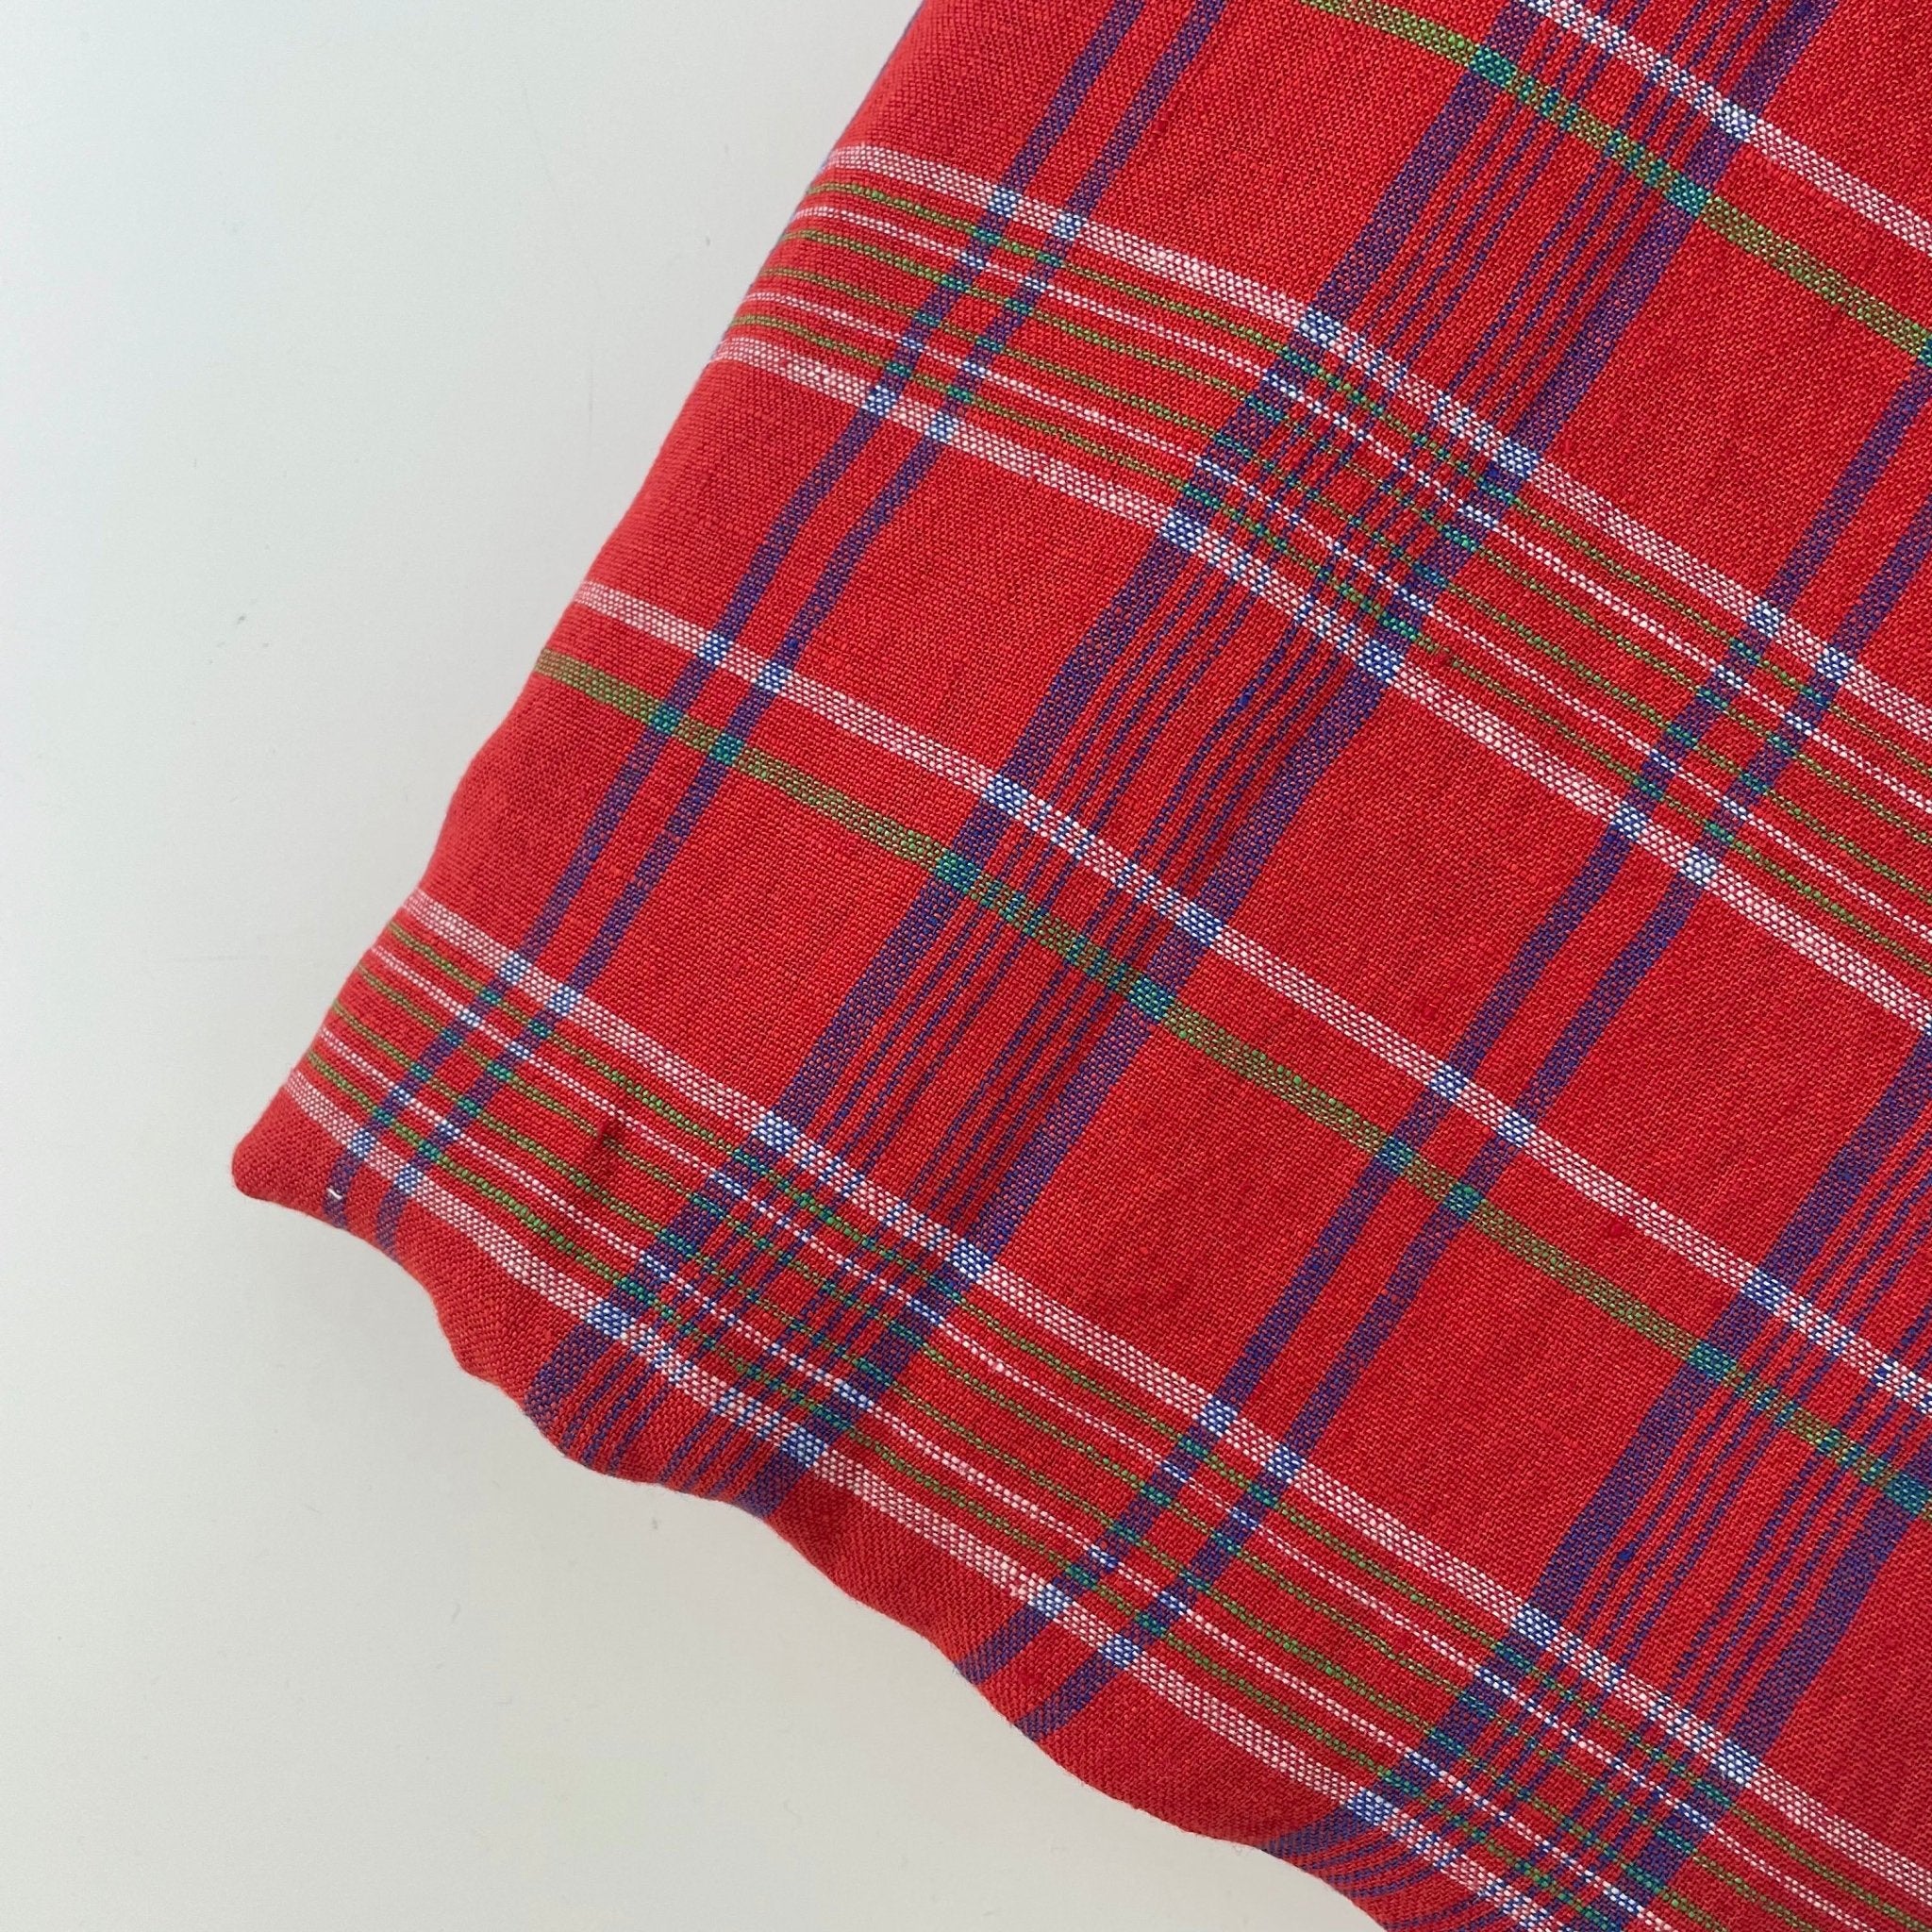 Linen Red Check Fabric 7376 - The Linen Lab - Red